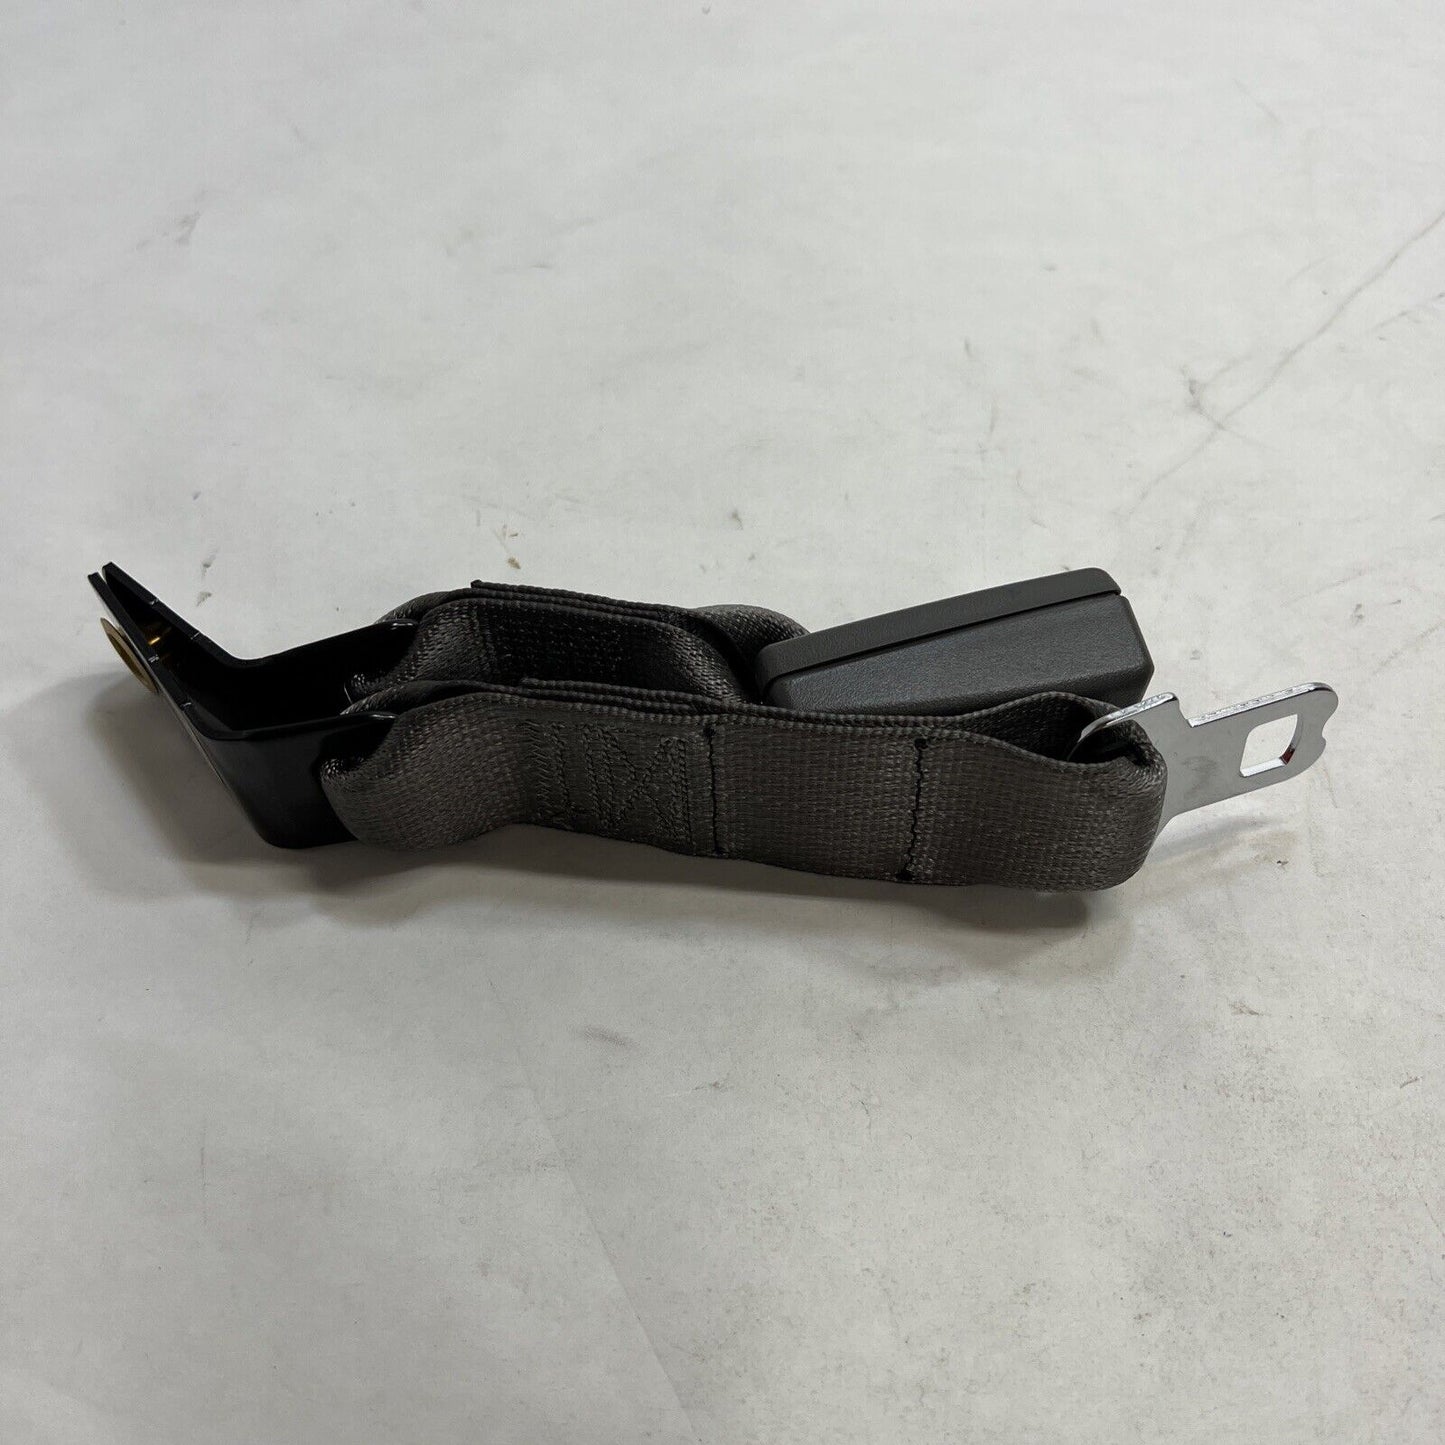 New OEM GM Chevy Express 2500 3500 Seat Belt with Buckle Rear 2011-2020 19300349